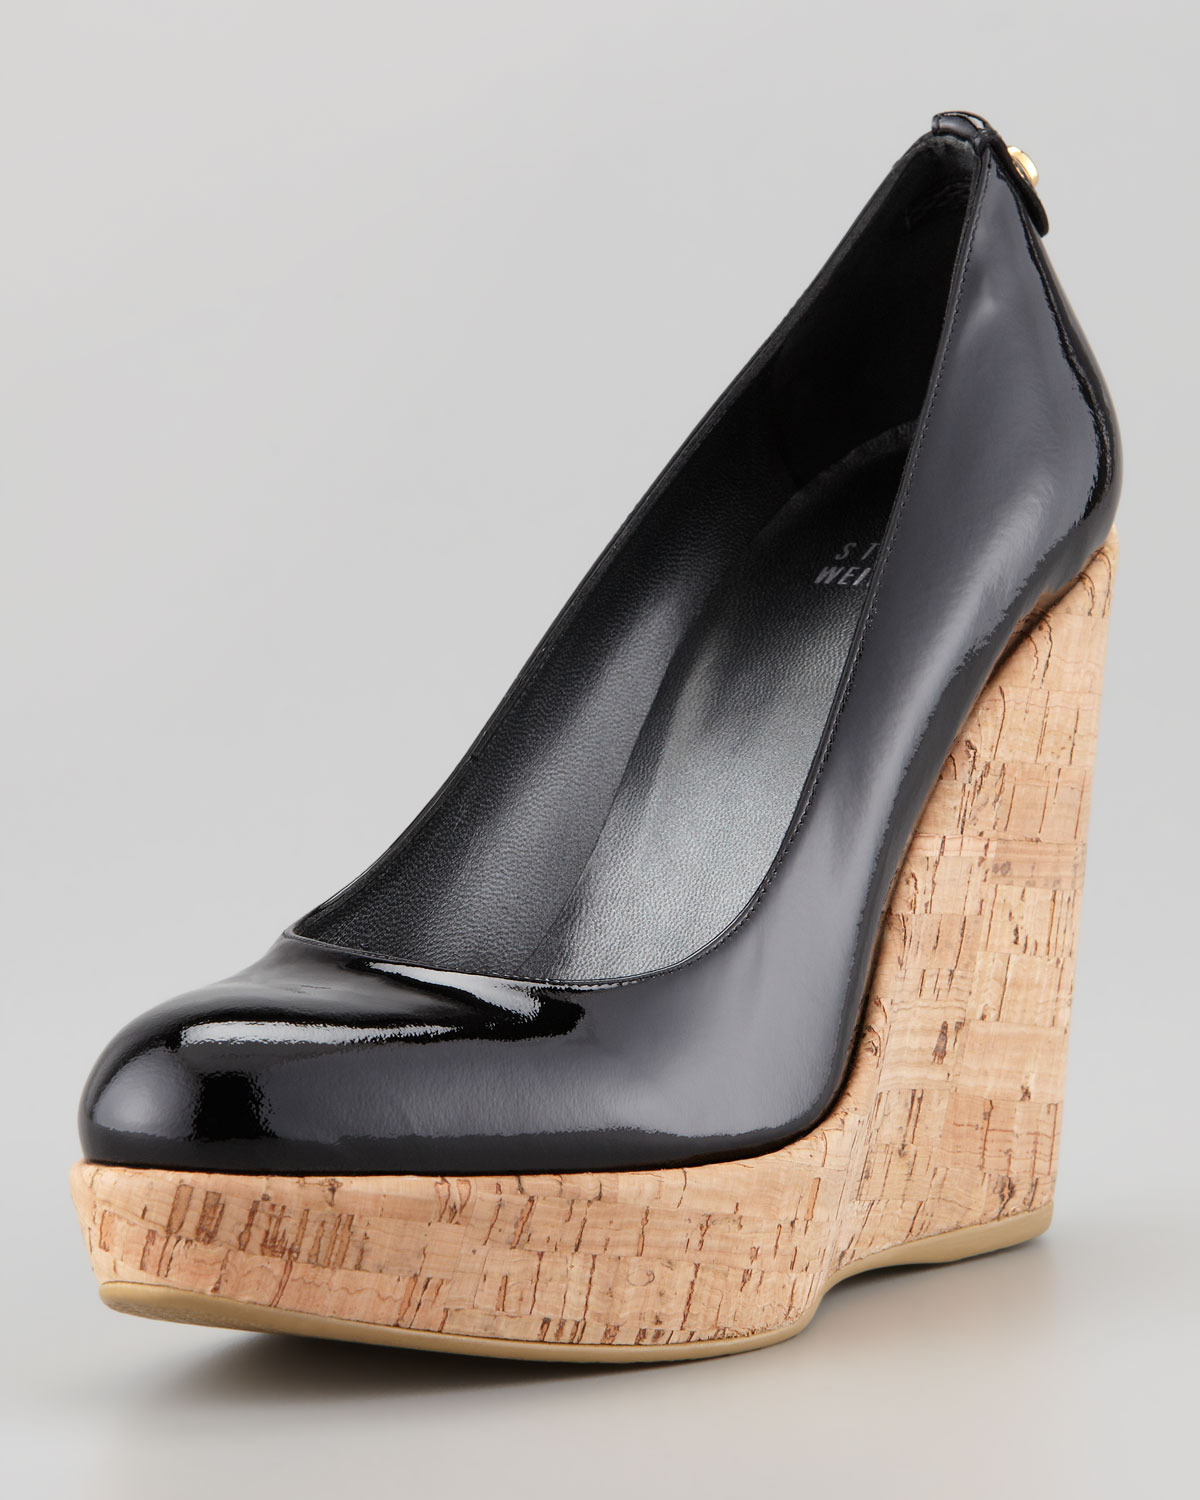 patent leather wedge heels